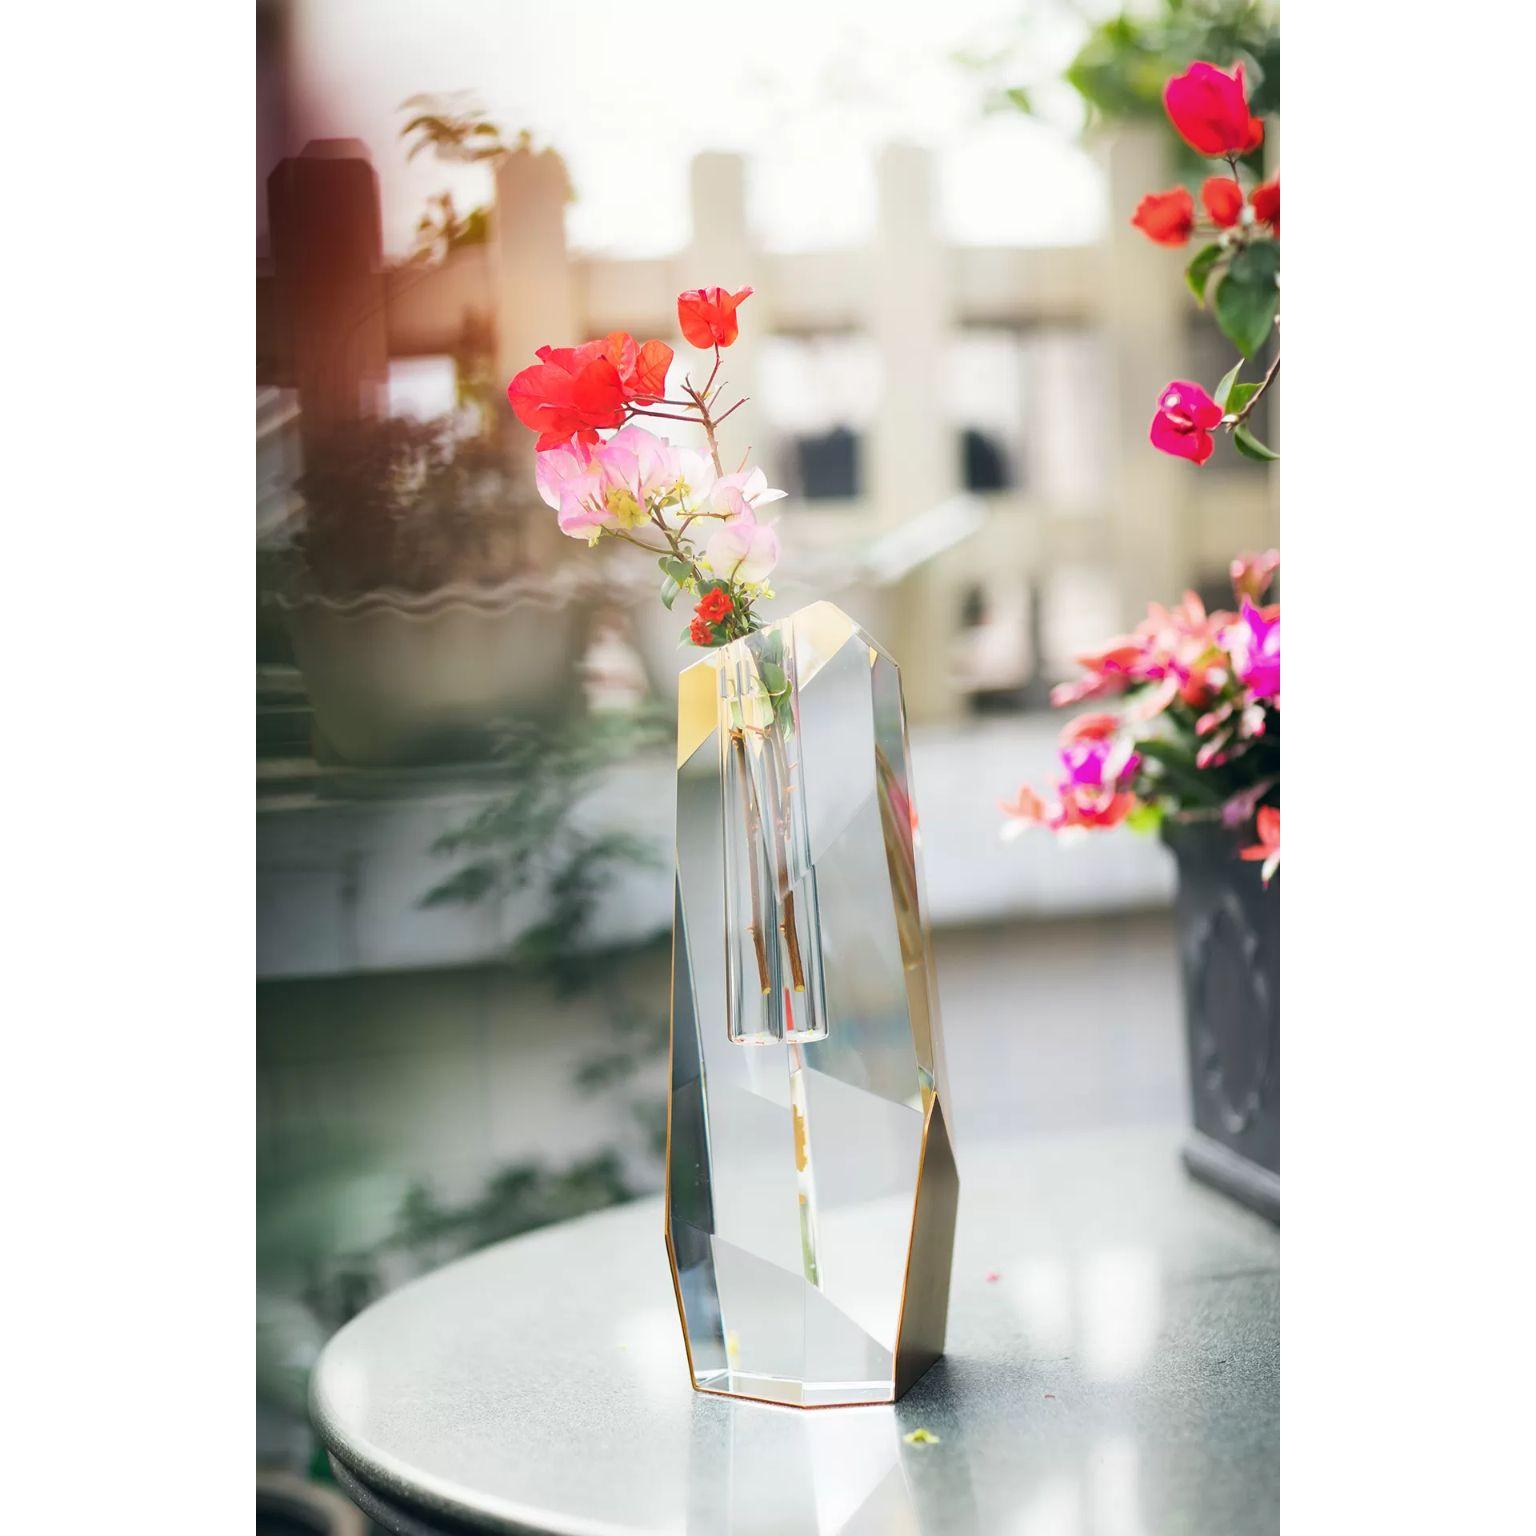 Tall Asymmetrical Crystal Vase with Brass Accents by Dainte
Dimensions: D 18 x W 18 x H 38 cm.
Materials: Crystal and brass.

A contemporary and modern vase like no other, this crystal and brass tall vase lets your florals shine. Its geometric and